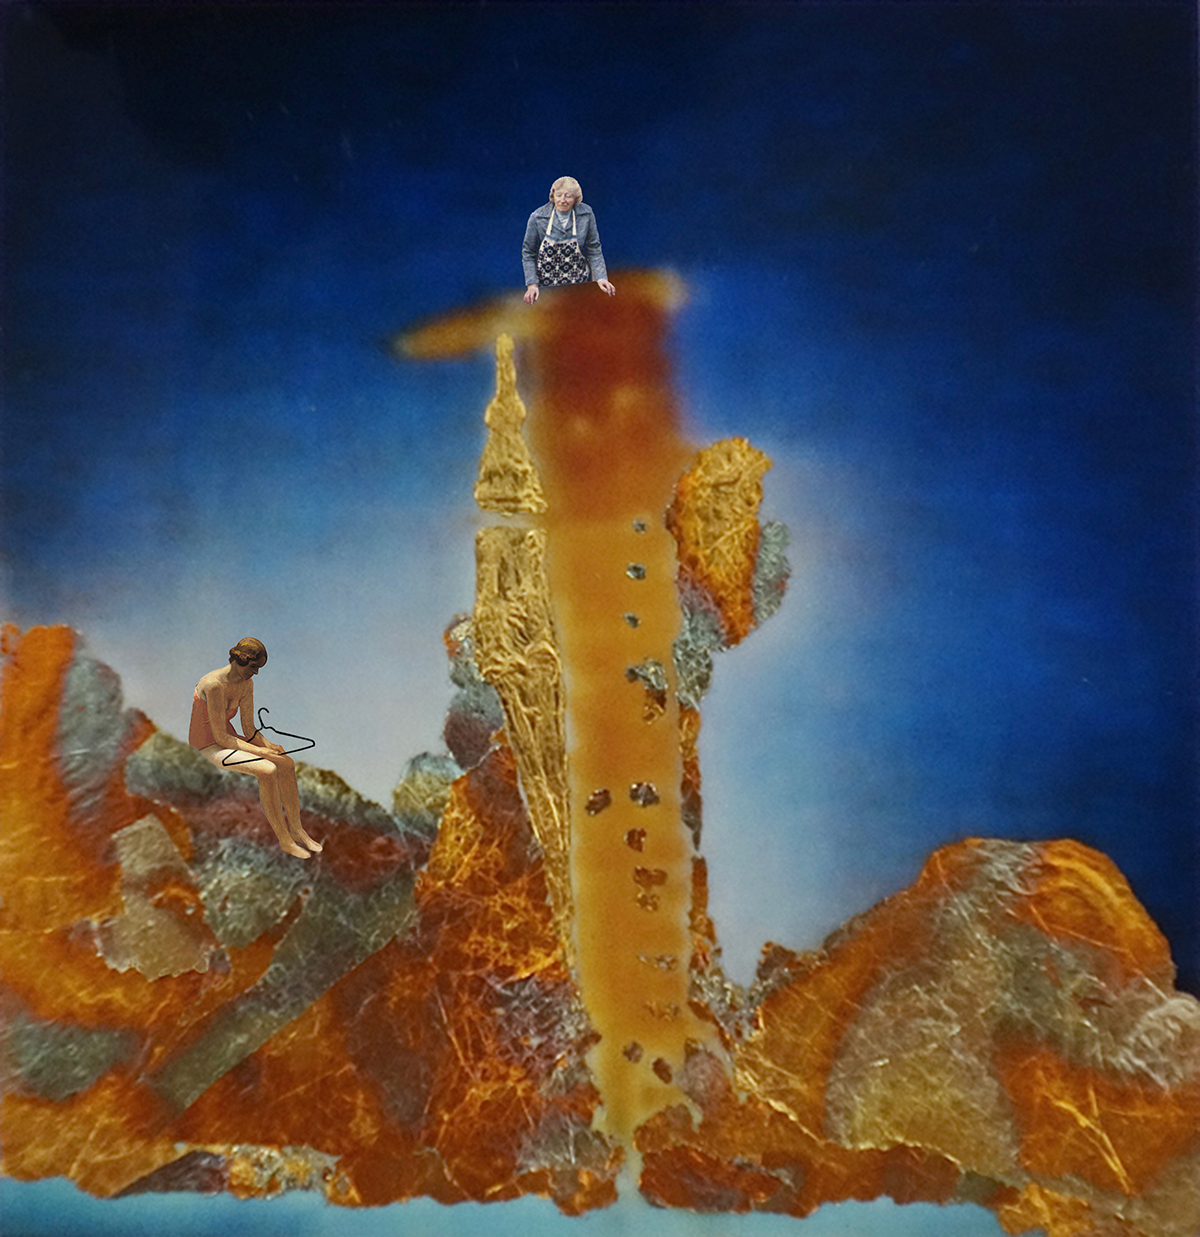 Surrounded by a cobalt blue sky, an elderly woman wearing an apron is perched above a phallic-shaped rockey crag. She looks down on a despondent young woman, who holds a coat hanger in her lap.